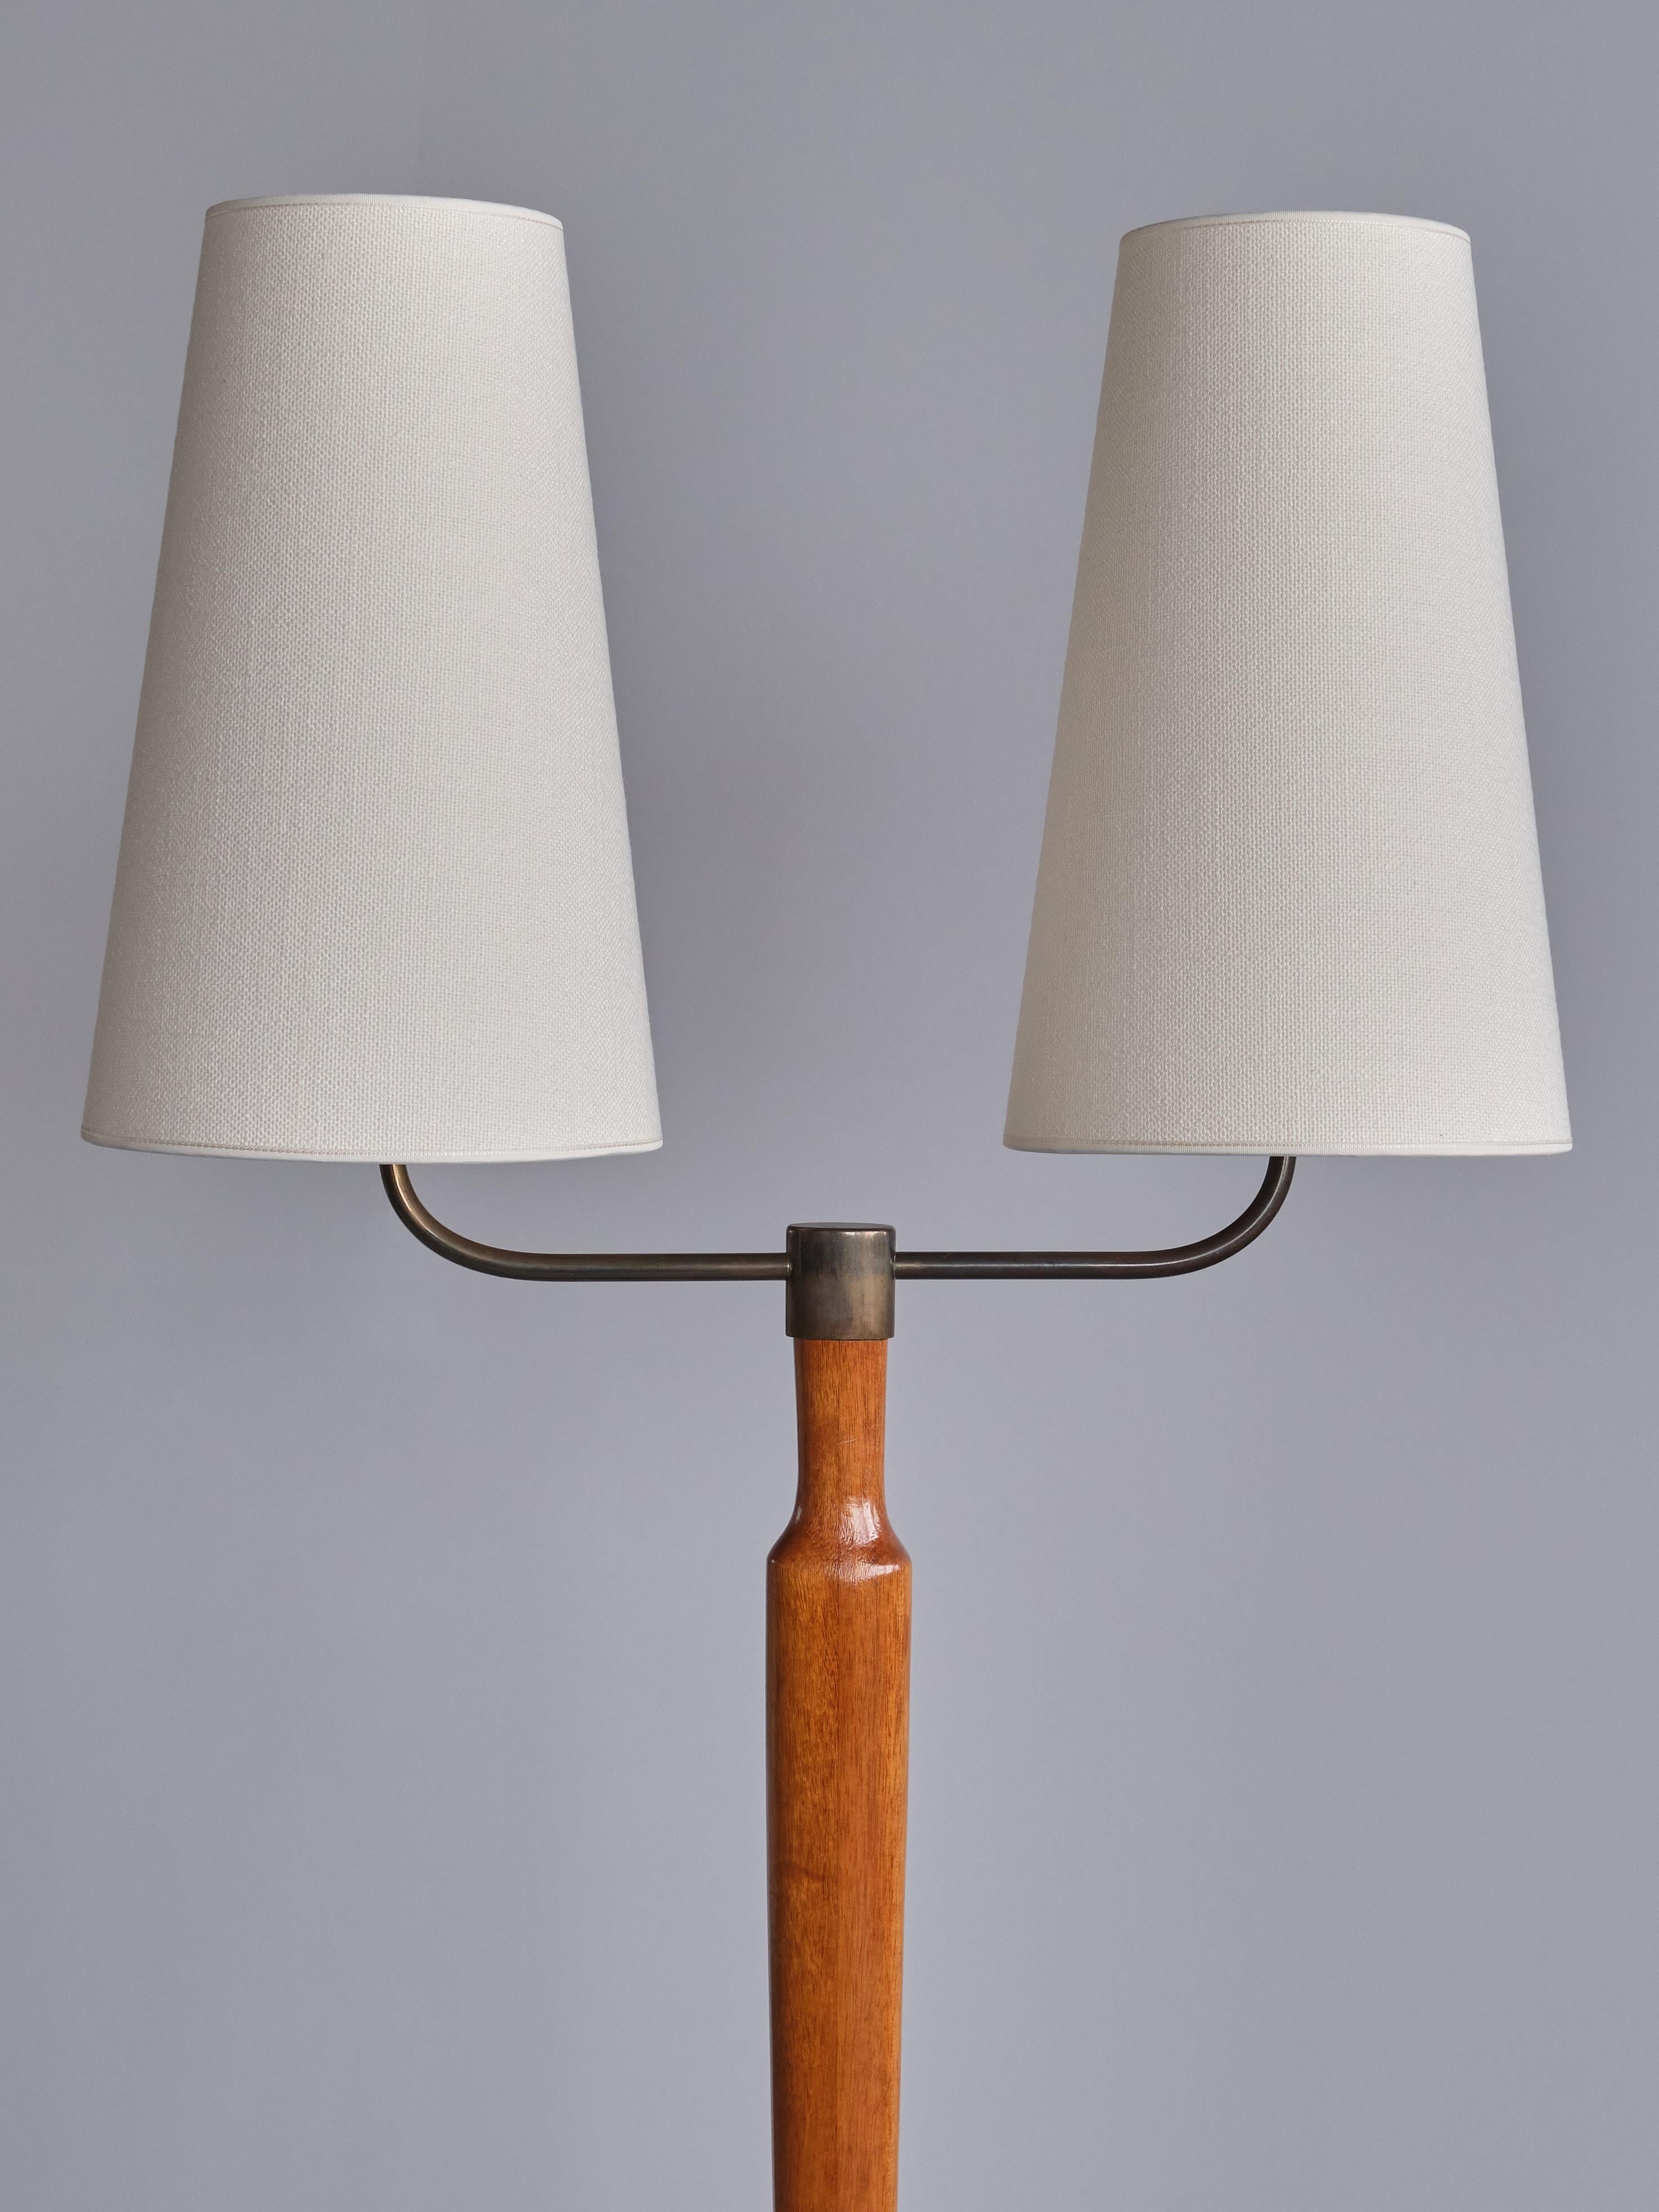 This elegant floor lamp was produced in Sweden in the late 1940s. The lamp is made of solid teak wood, with a warm and attractive grain. The design consists of slightly raised base in a rounded rectangular shape. Central stem in a tapered shape and